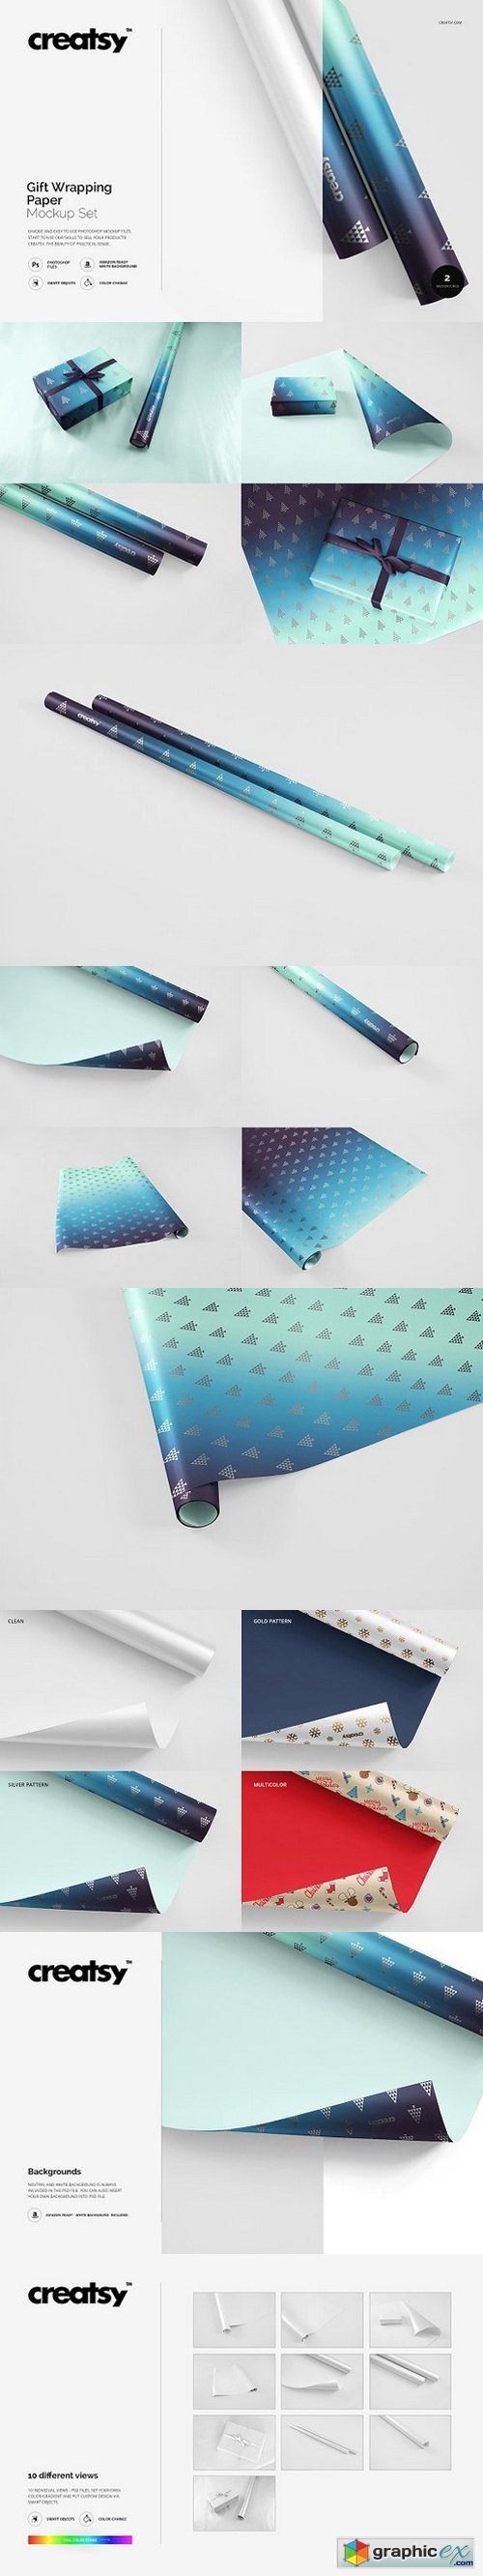 Gift Wrapping Paper Mockup Set